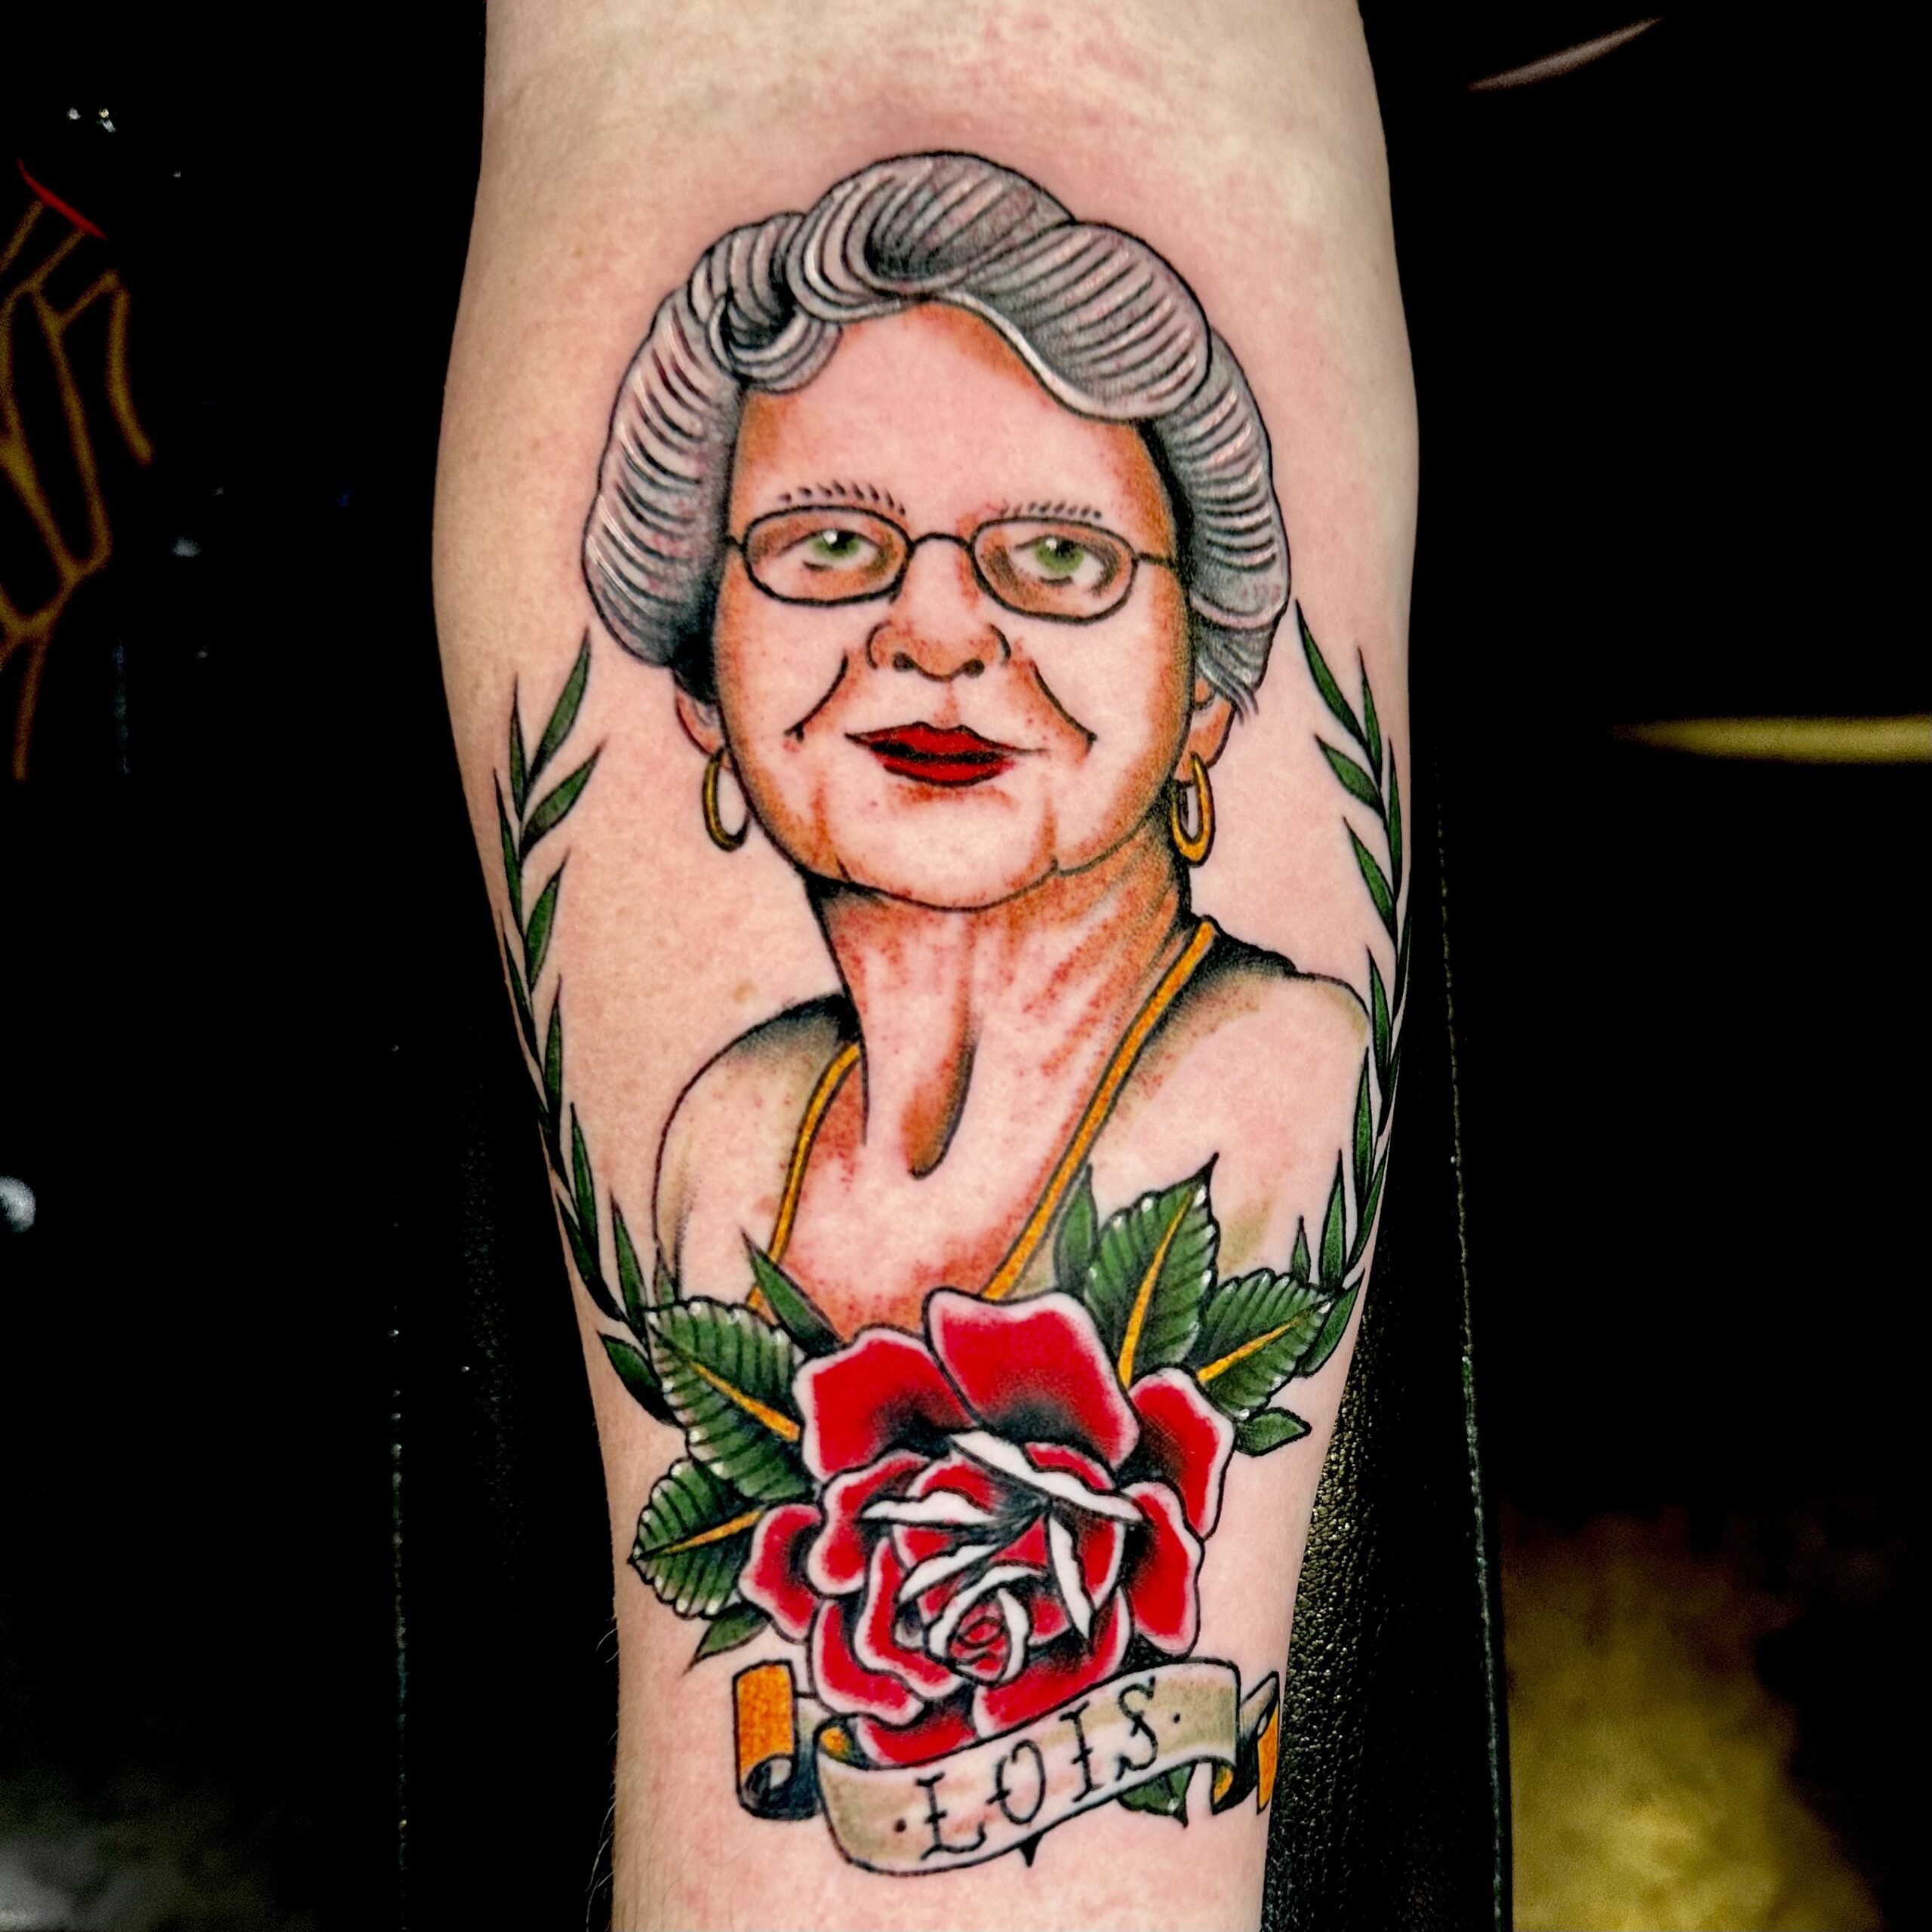 Tattoo of a woman from top shop in Dallas